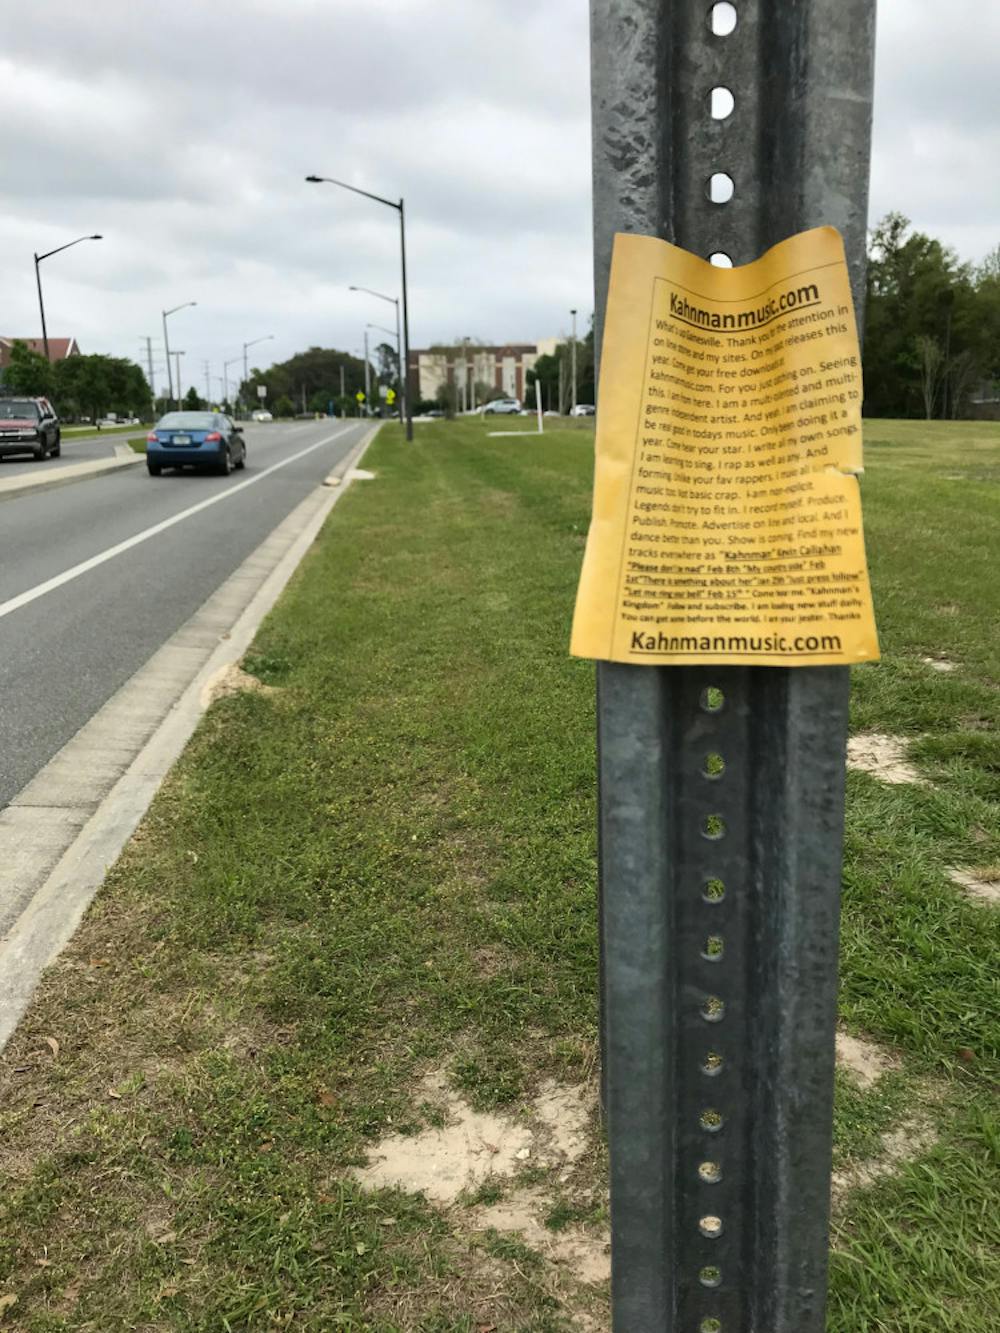 <p>Callahan posted these yellow flyers at bus stops across Gainesville to promote his music.</p>